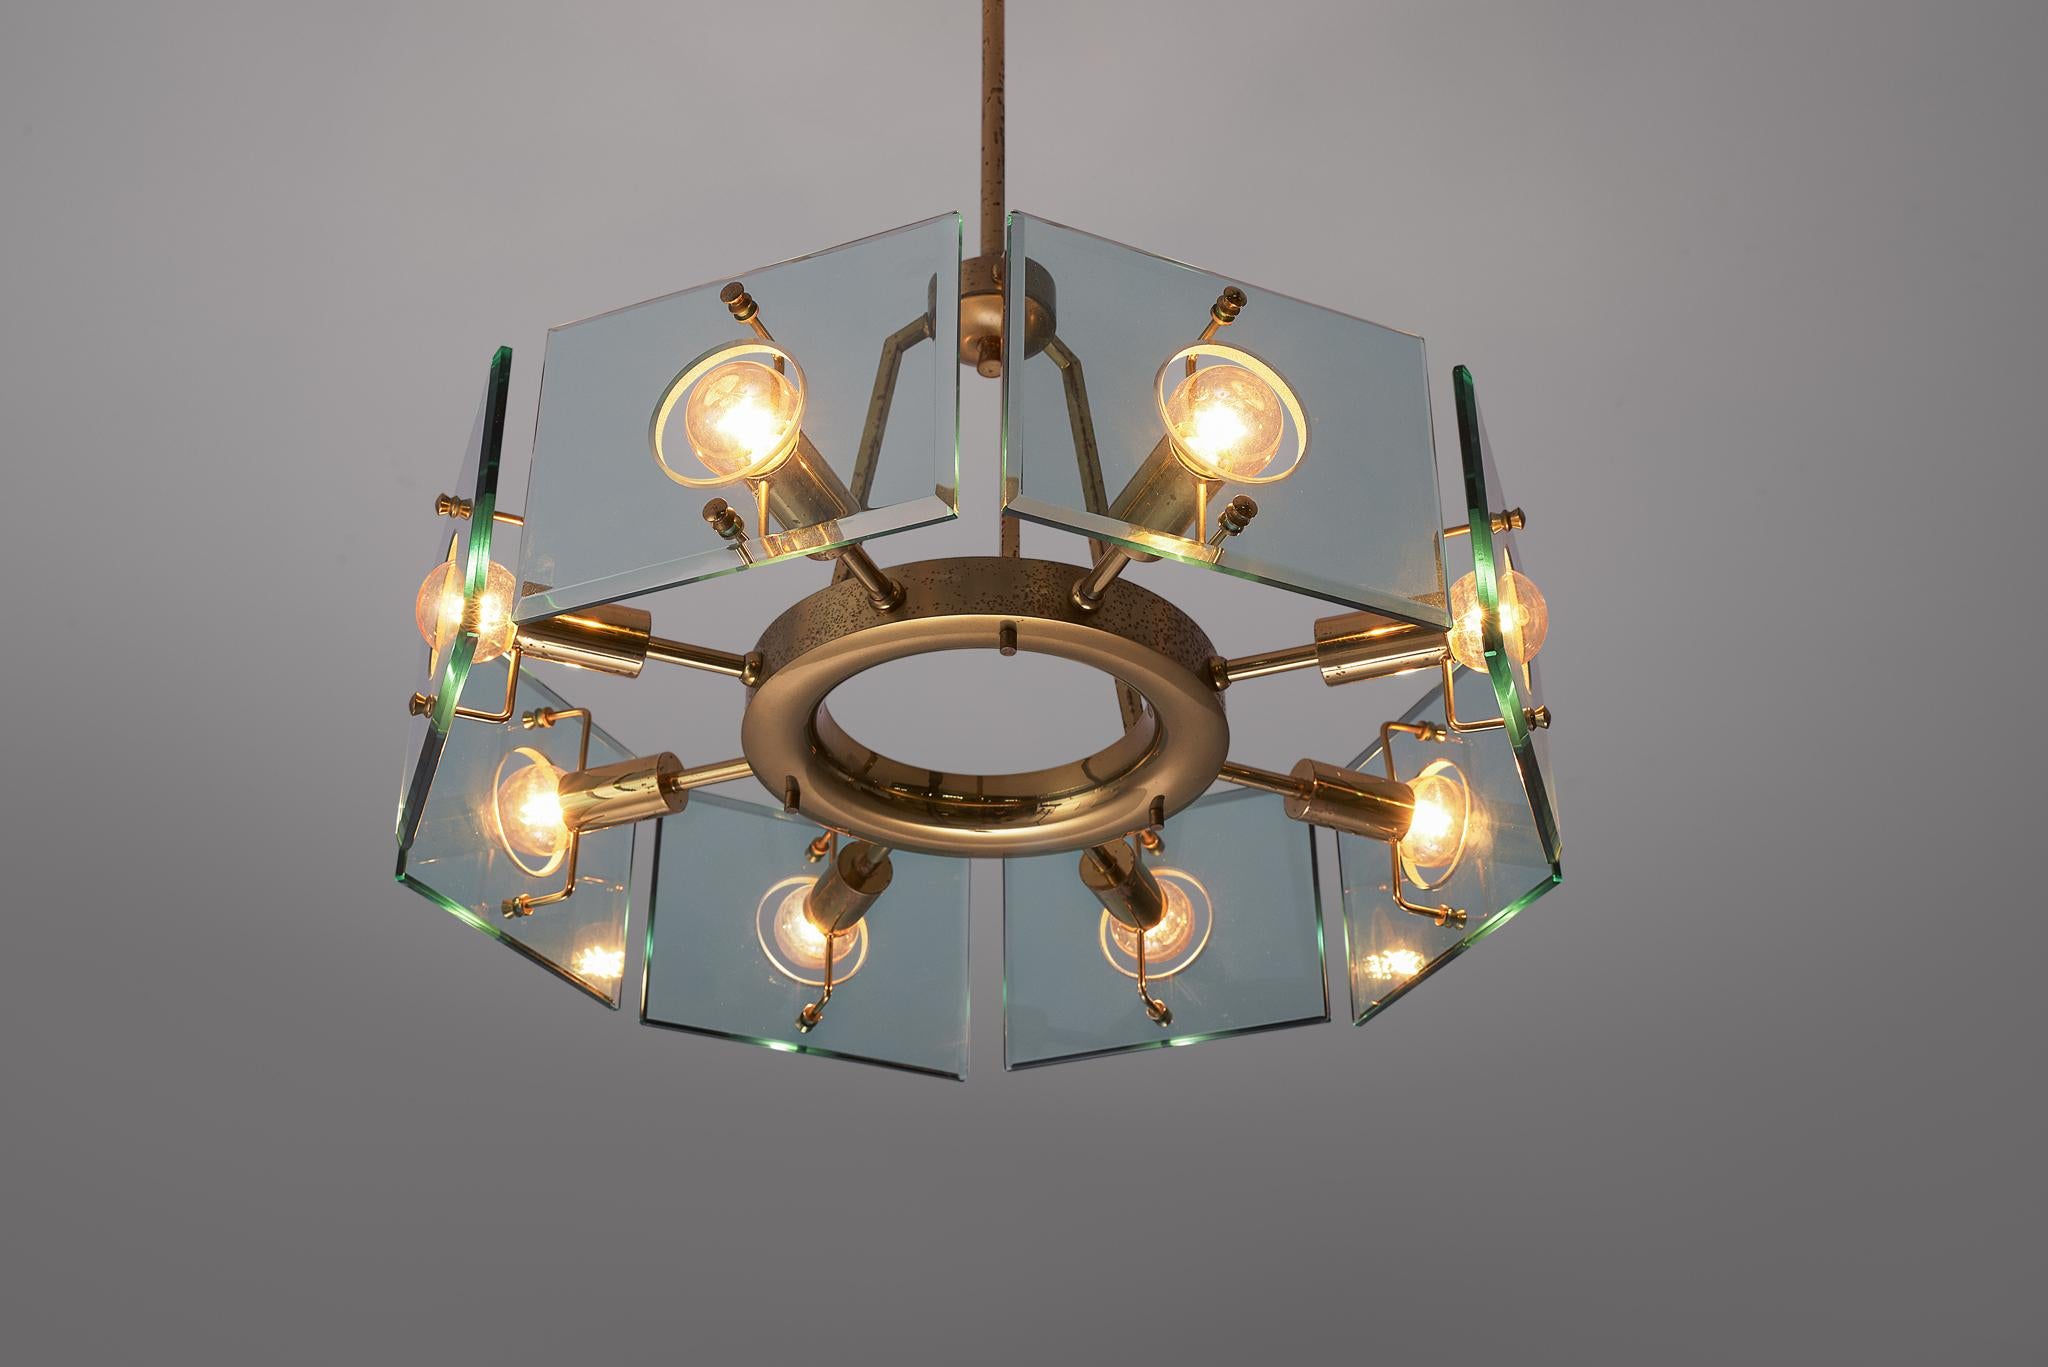 Mid-20th Century Italian Chandelier in Brass and Glass by Gino Paroldo